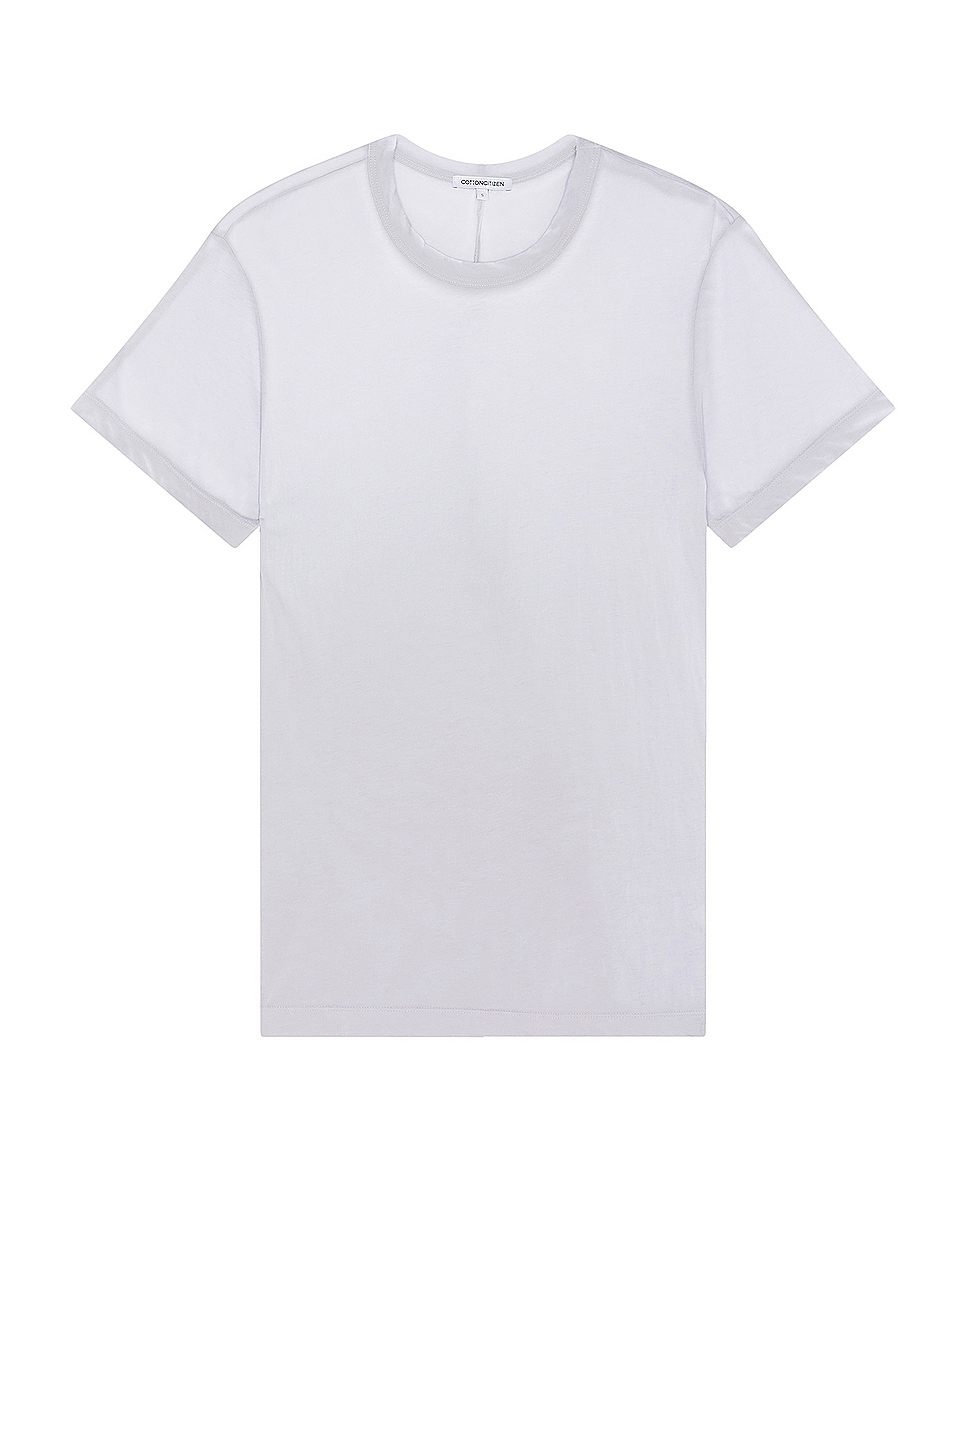 Image 1 of COTTON CITIZEN Prince Tee in Silver Cast